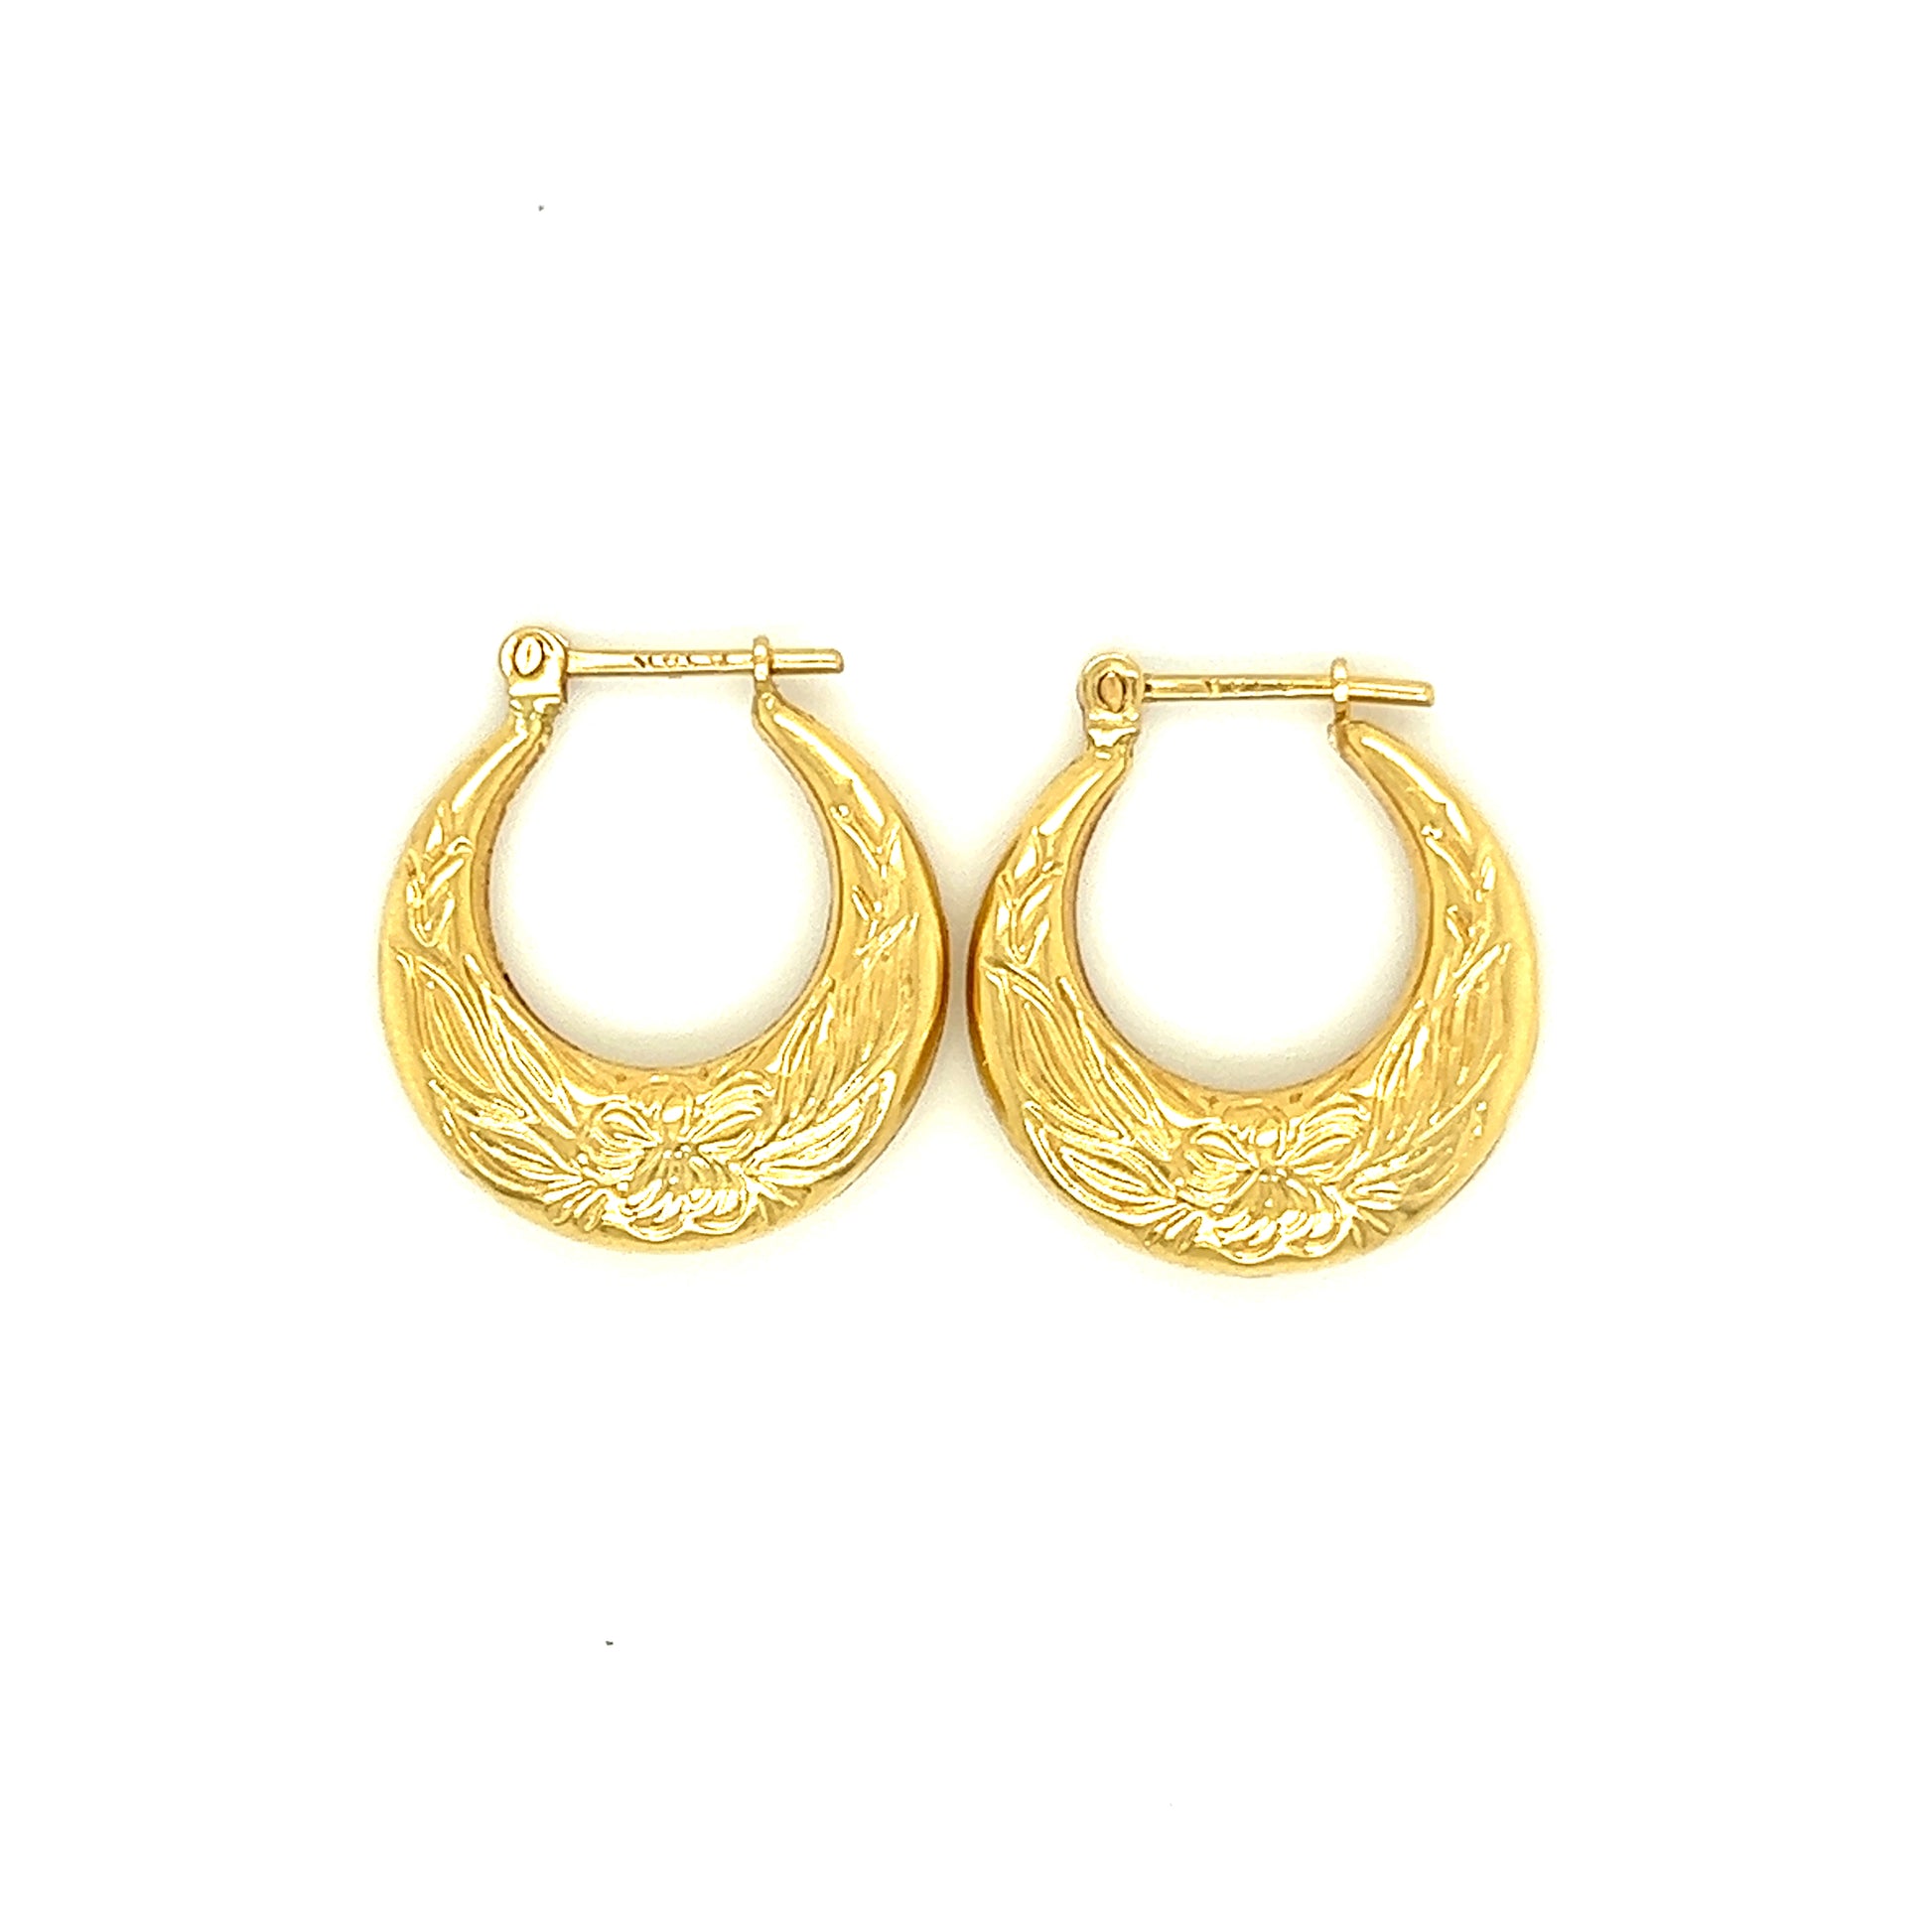 Hoop 18mm Earrings with Flower Engraving in 14K Yellow Gold Top View Closed Clasp